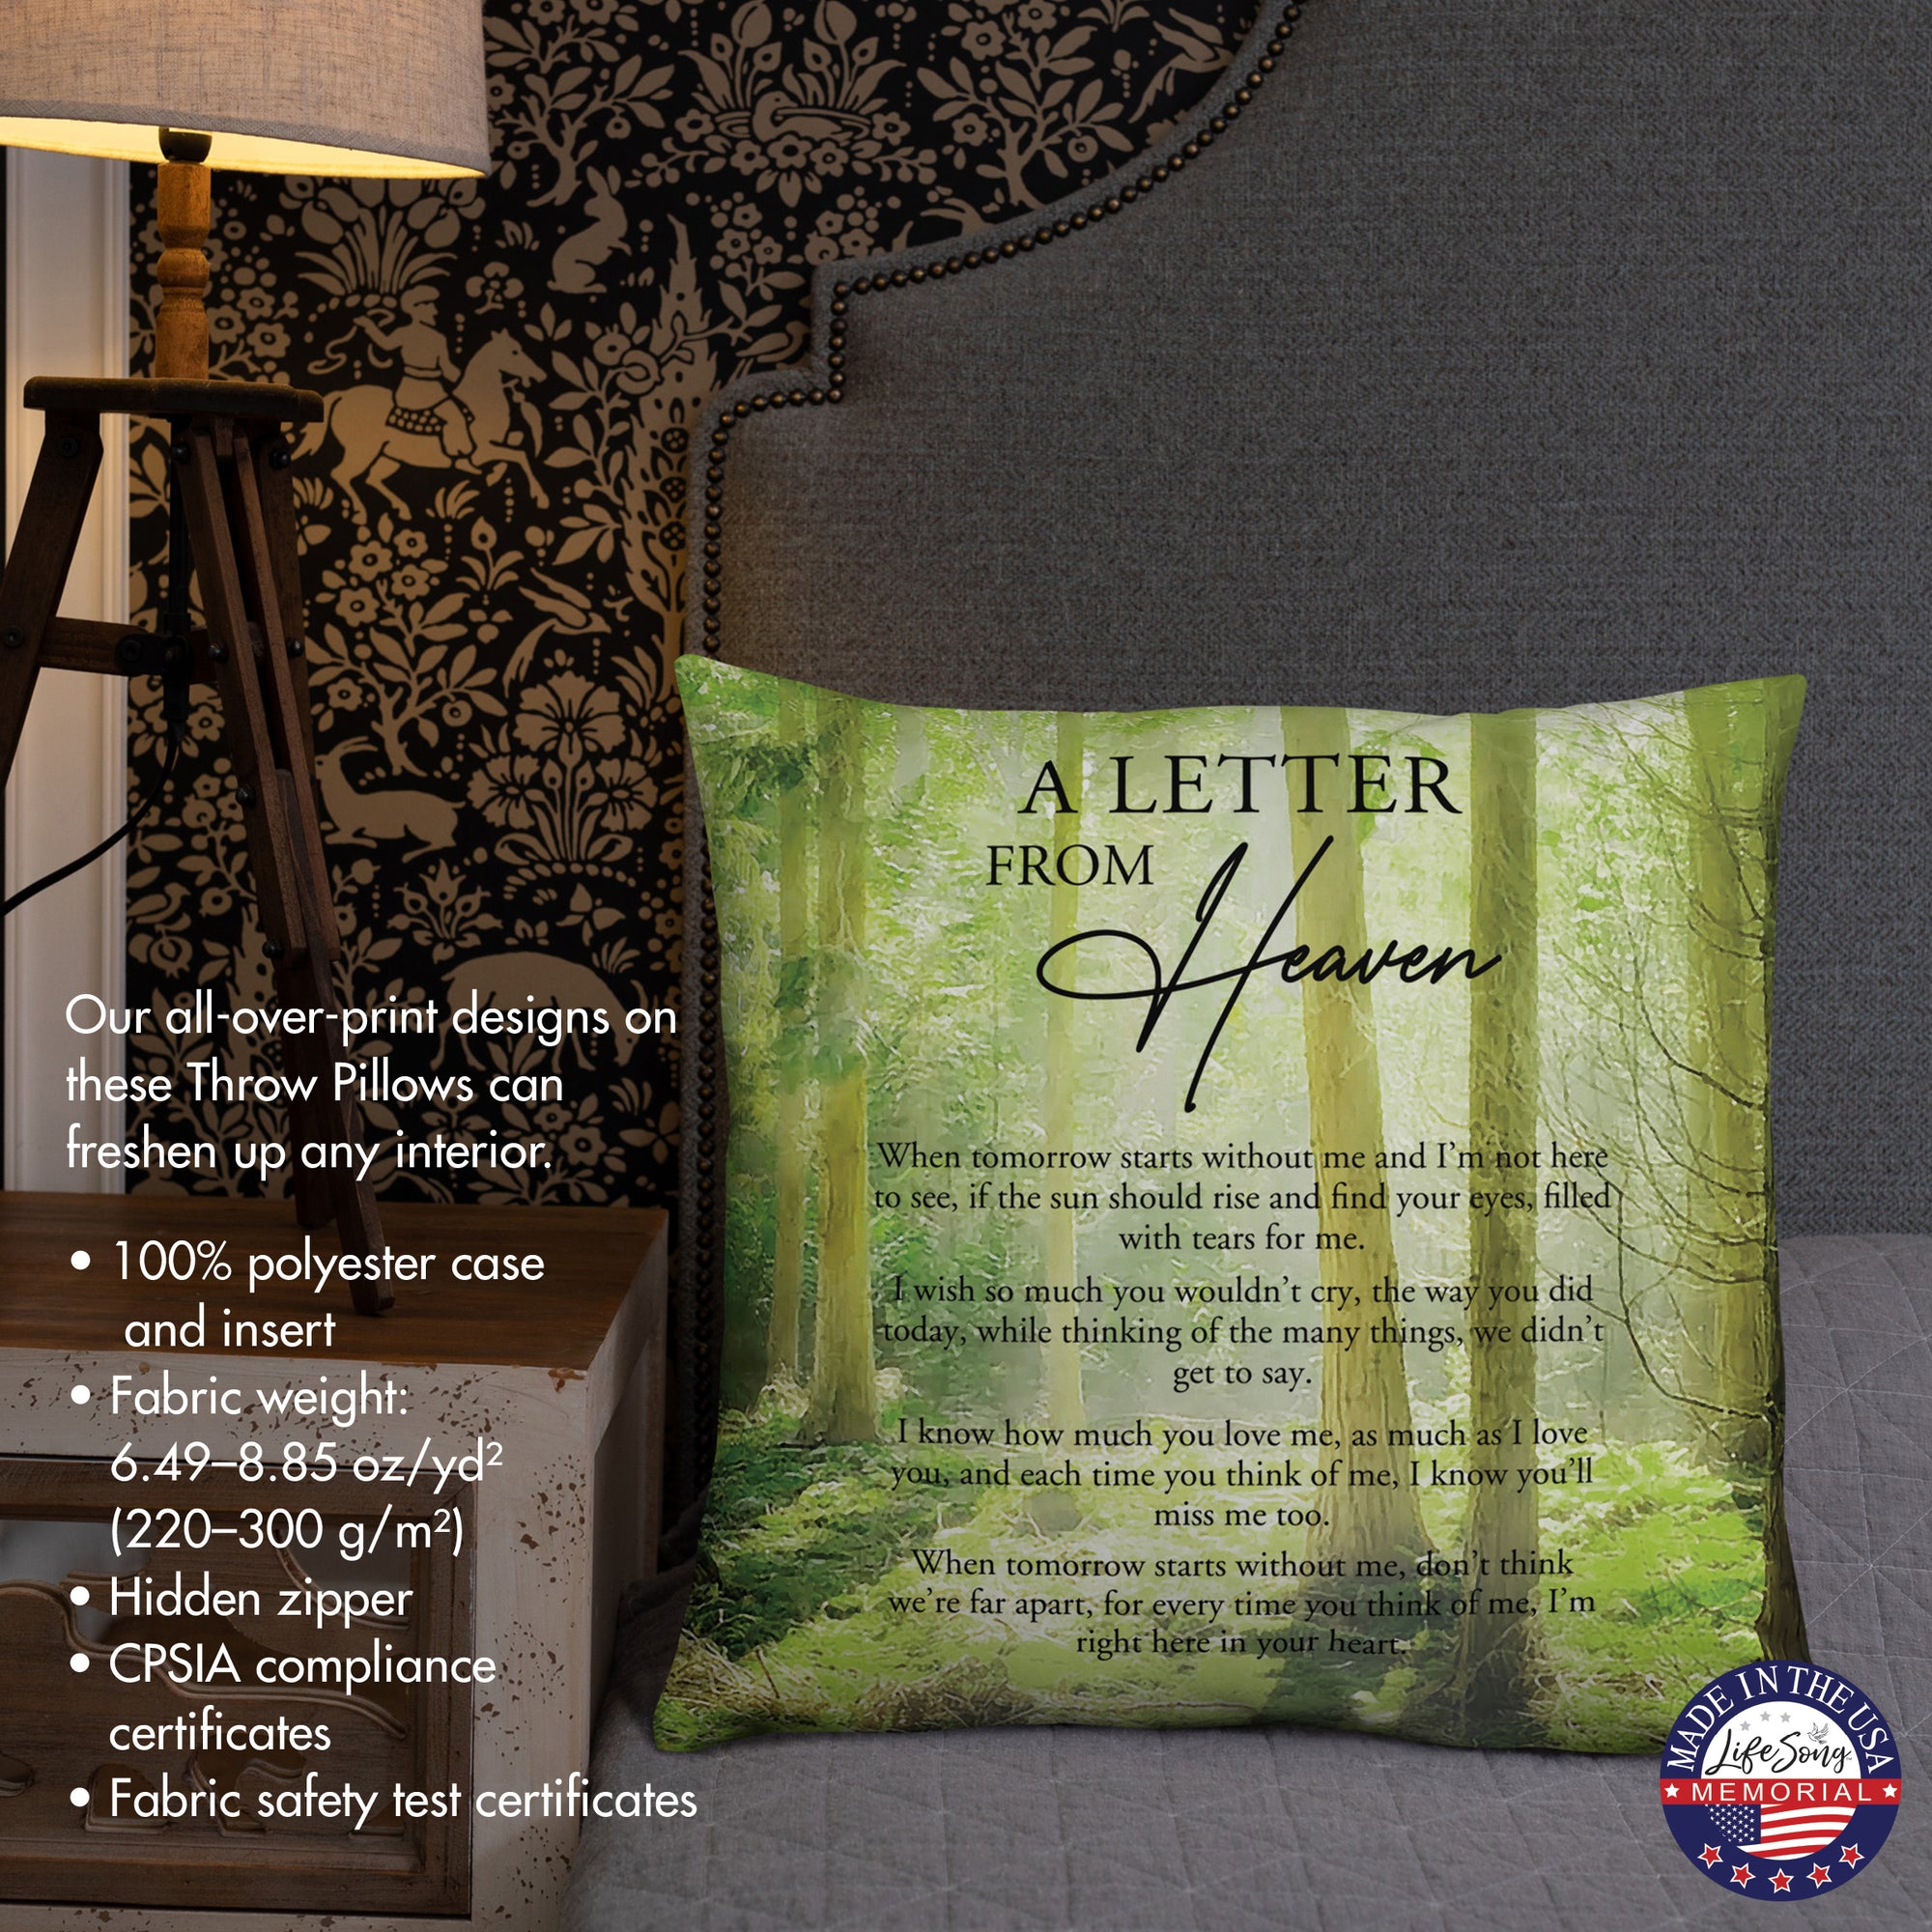 A beautiful bereavement pillow, designed for both comfort and remembrance, it's an ideal memorial home decor piece.